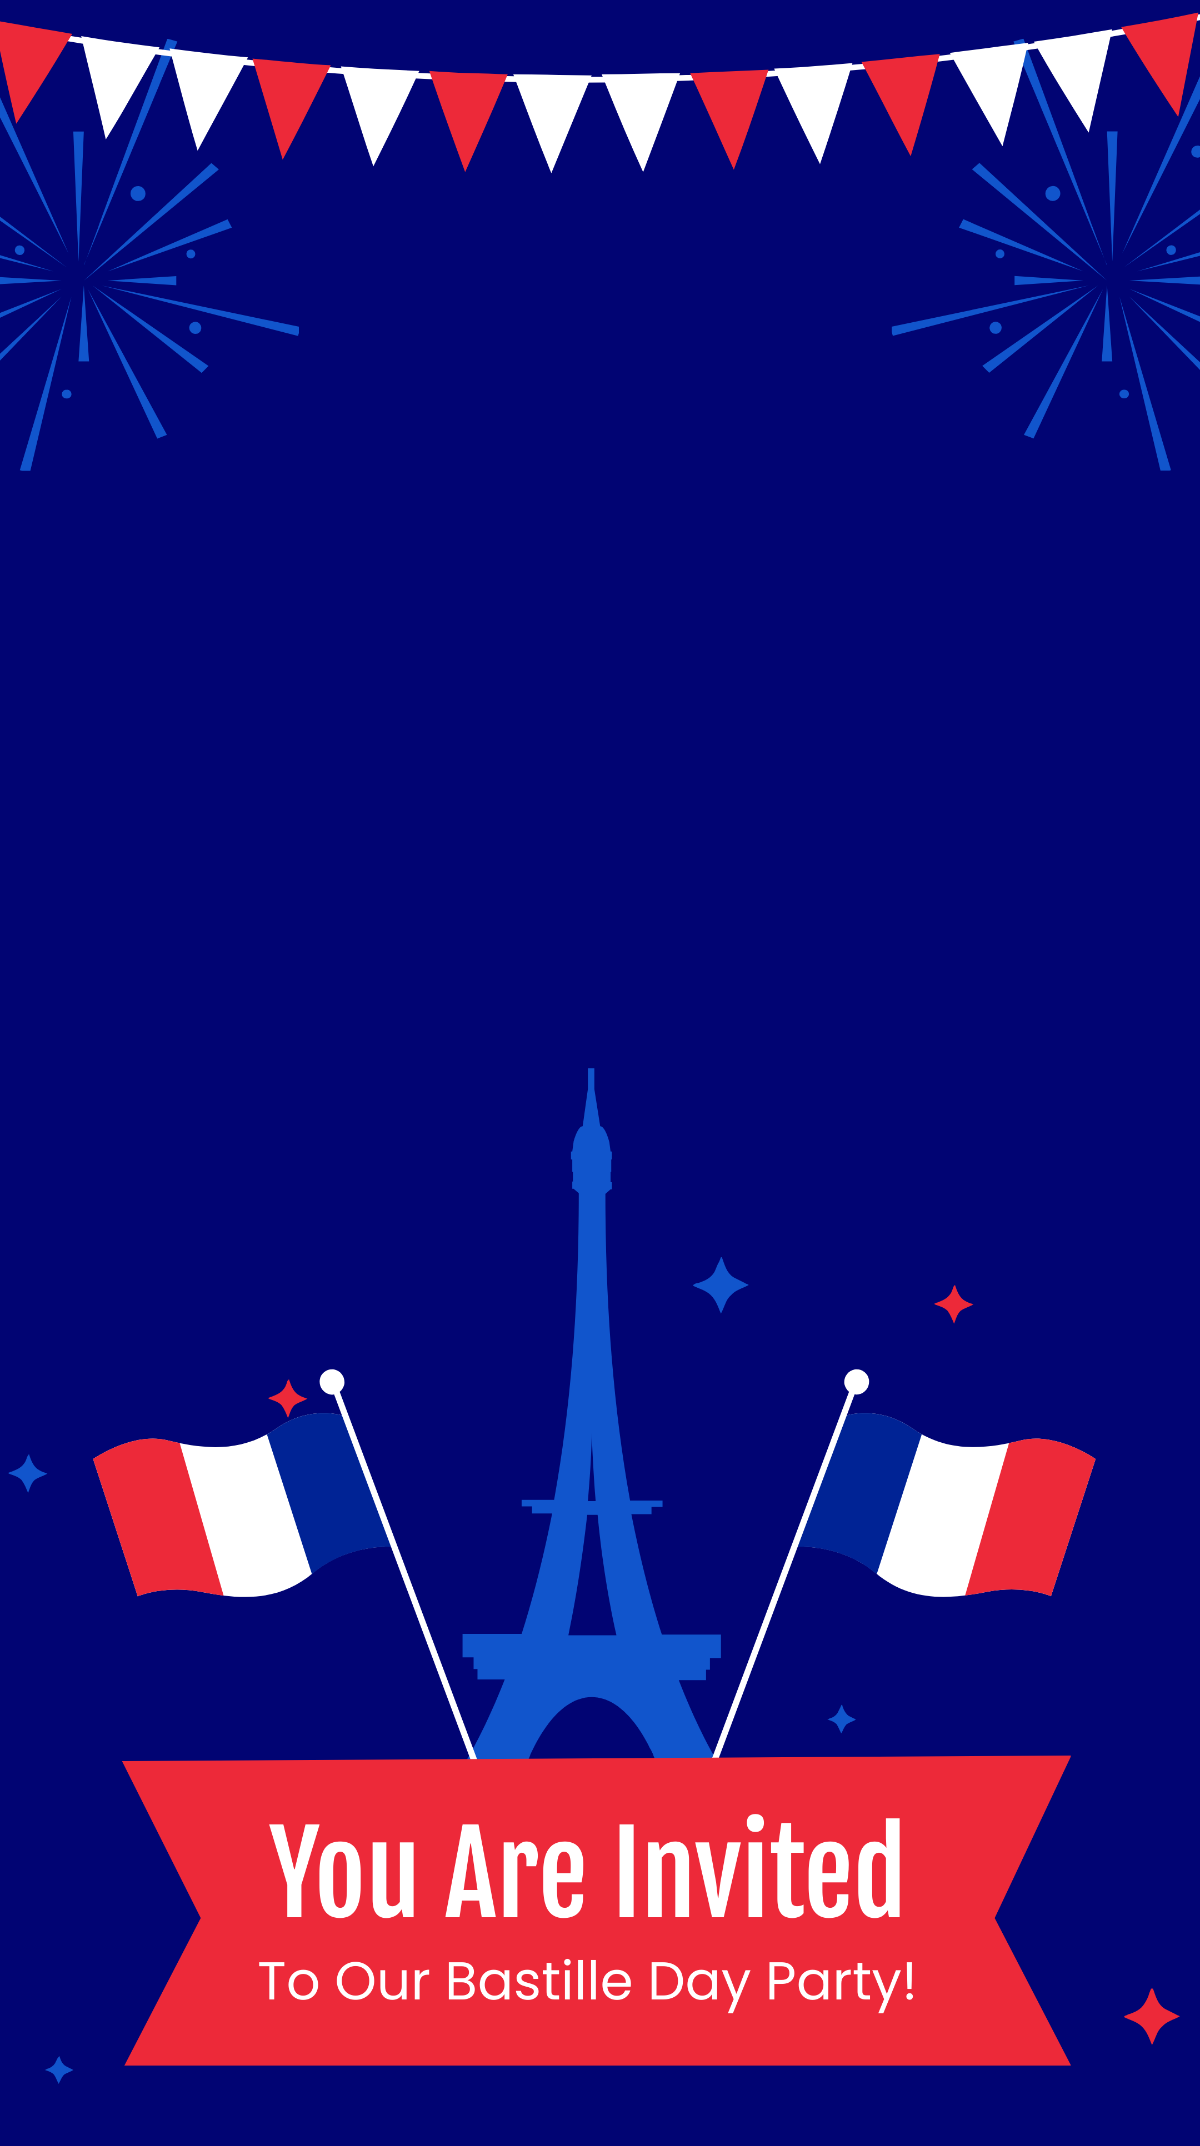 Free Bastille Day Party Snapchat Geofilter Template